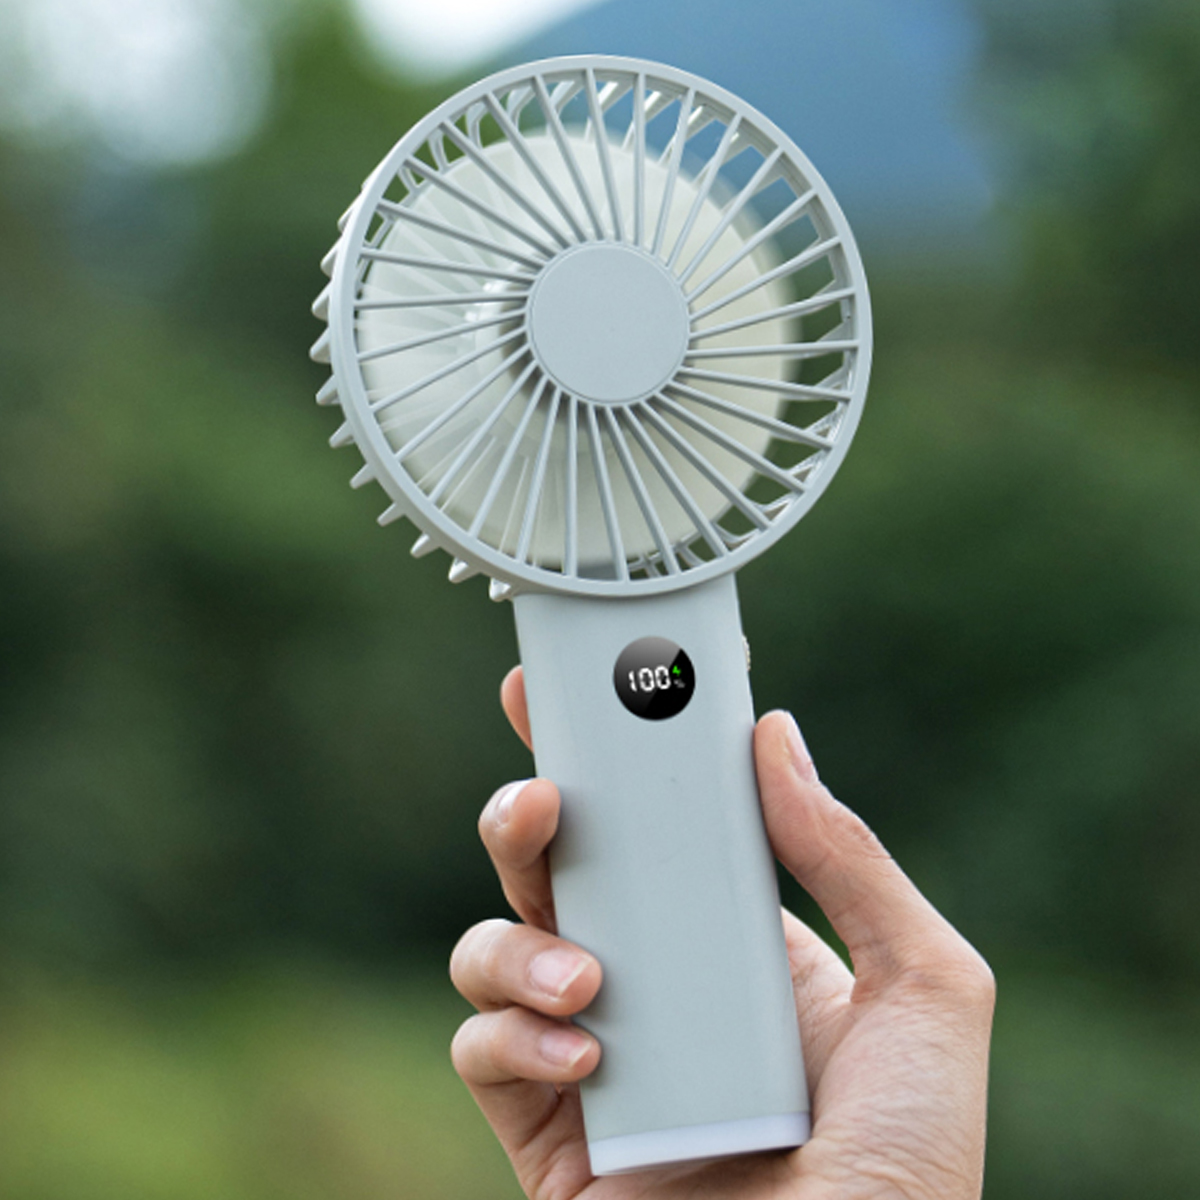 The Ultimate Handheld Fan Comparison: Which One Will Keep You Cool This Summer?